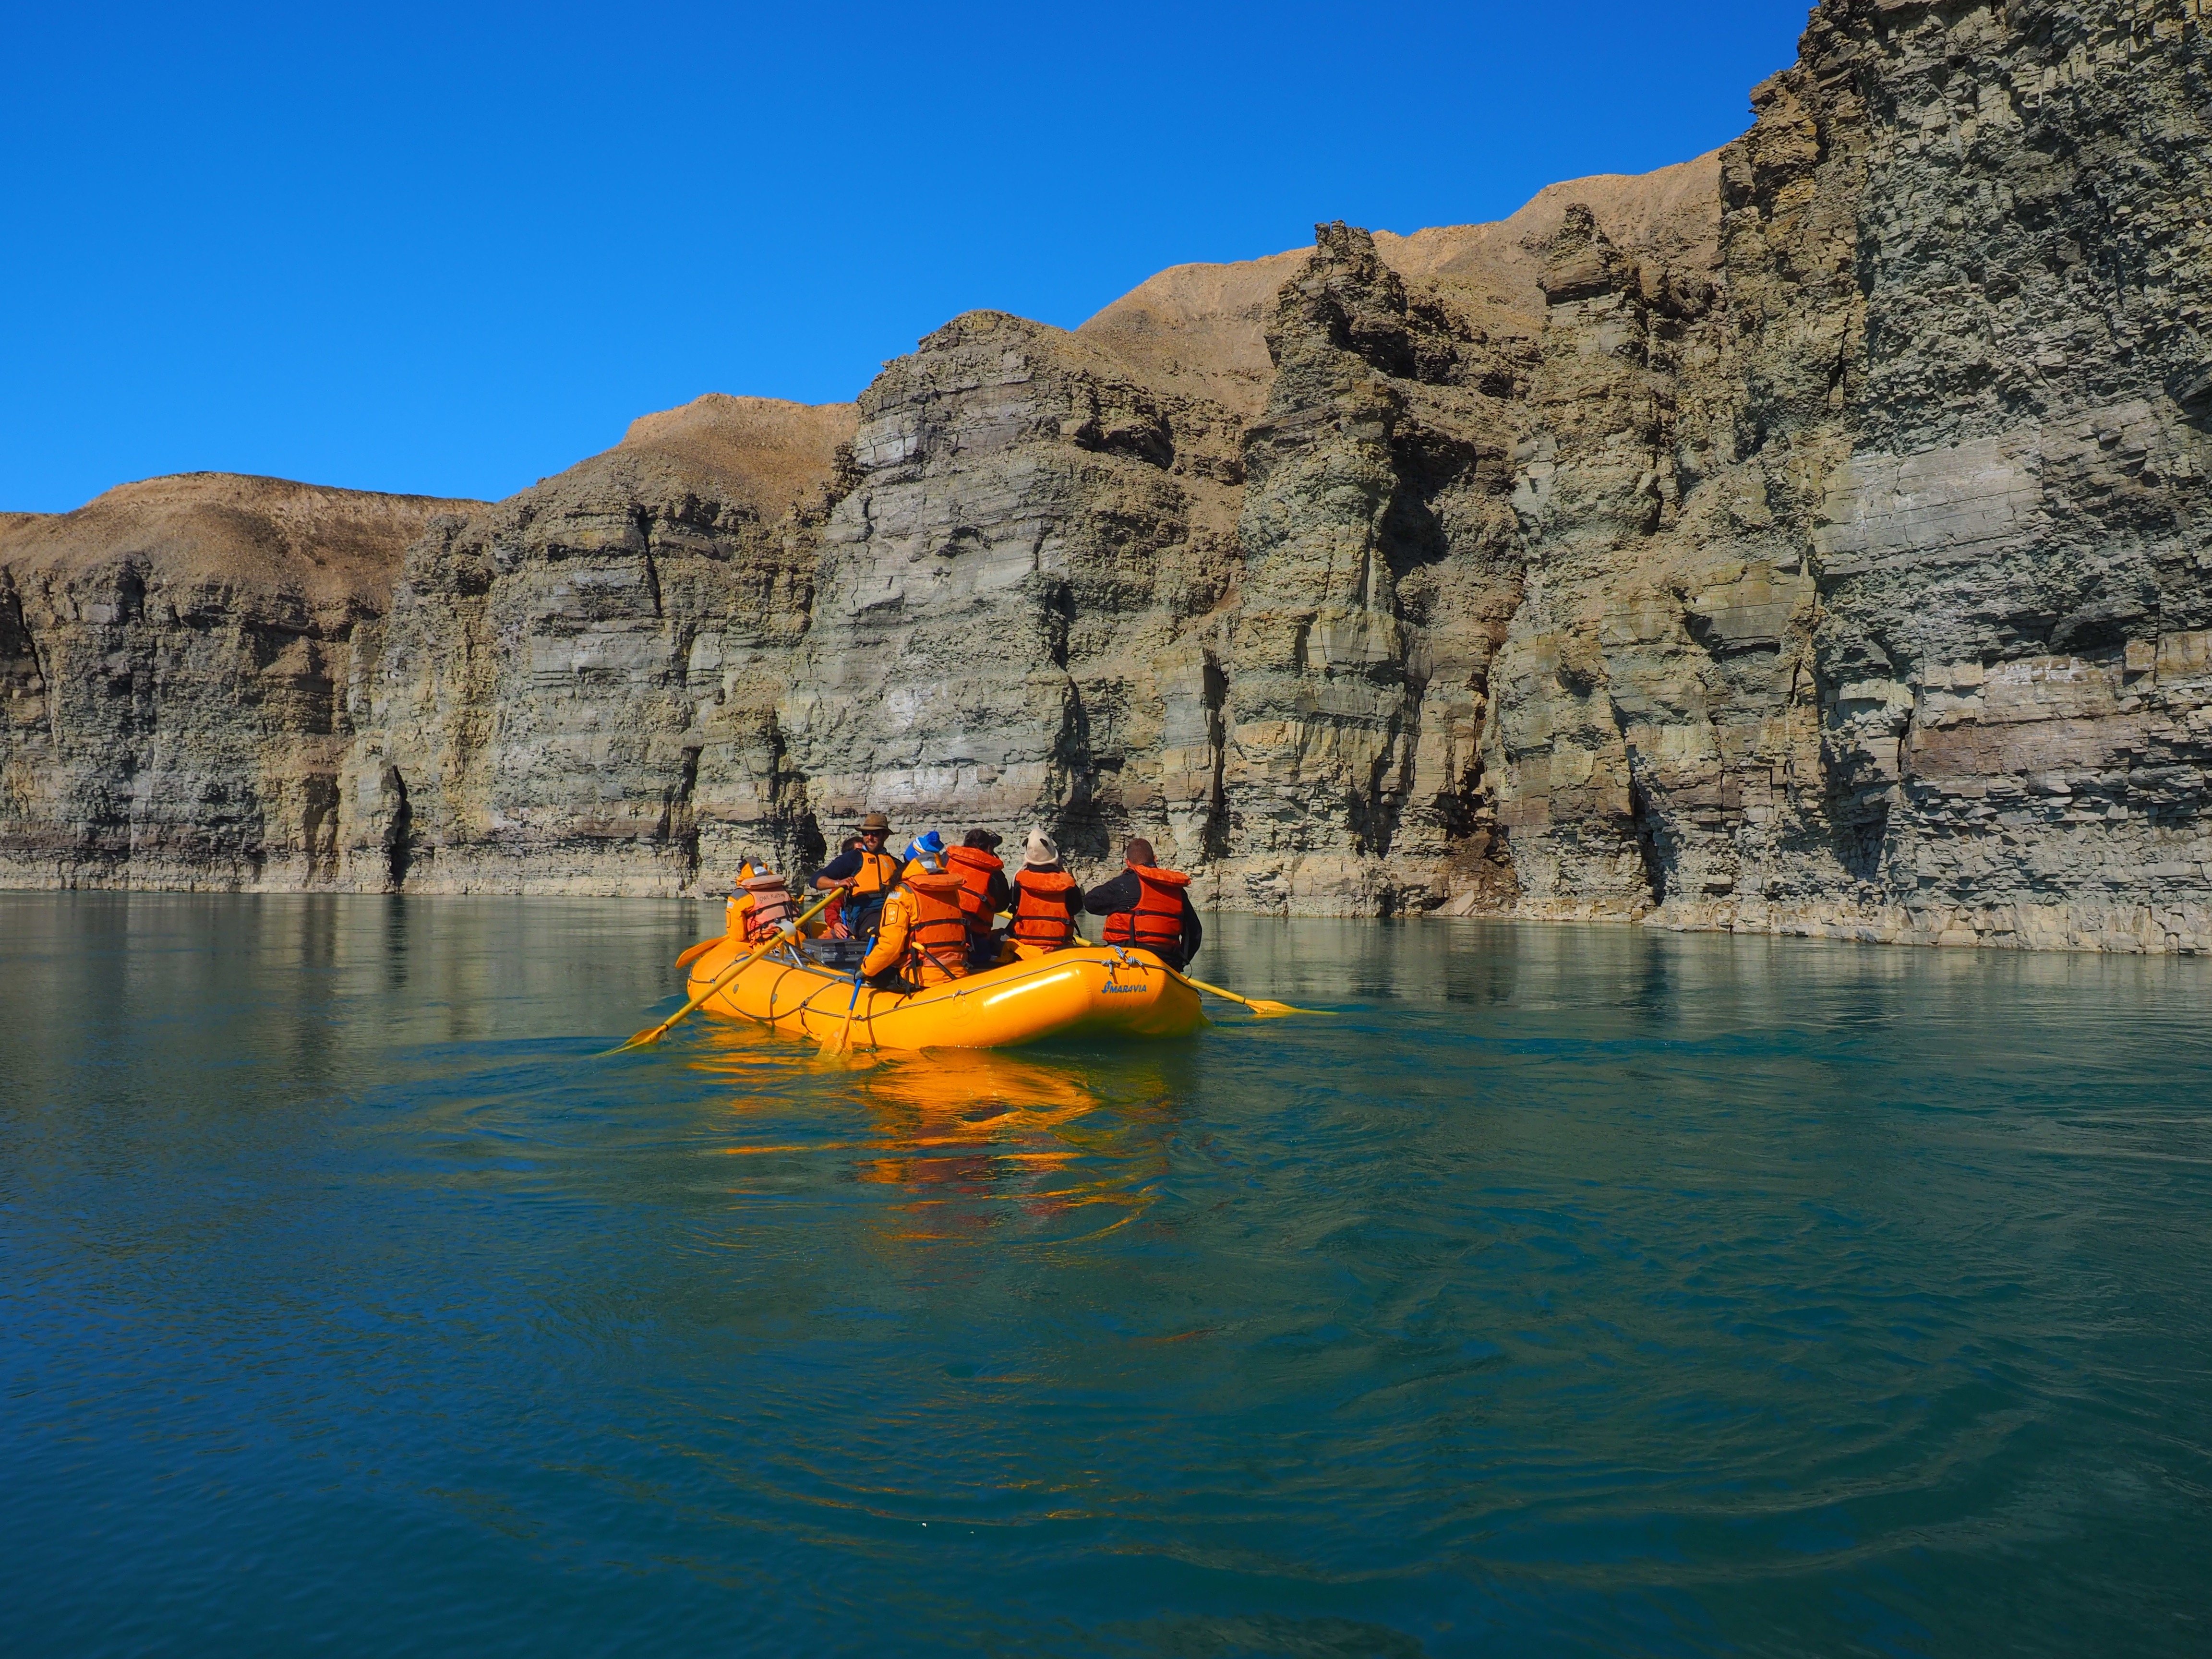 Action-packed expeditions at Arctic Watch will see you on a variety of adventures: go out in guided groups to kayak, hike, fish, ATV, bike the tundra, go stand-up paddleboarding and take photographs.